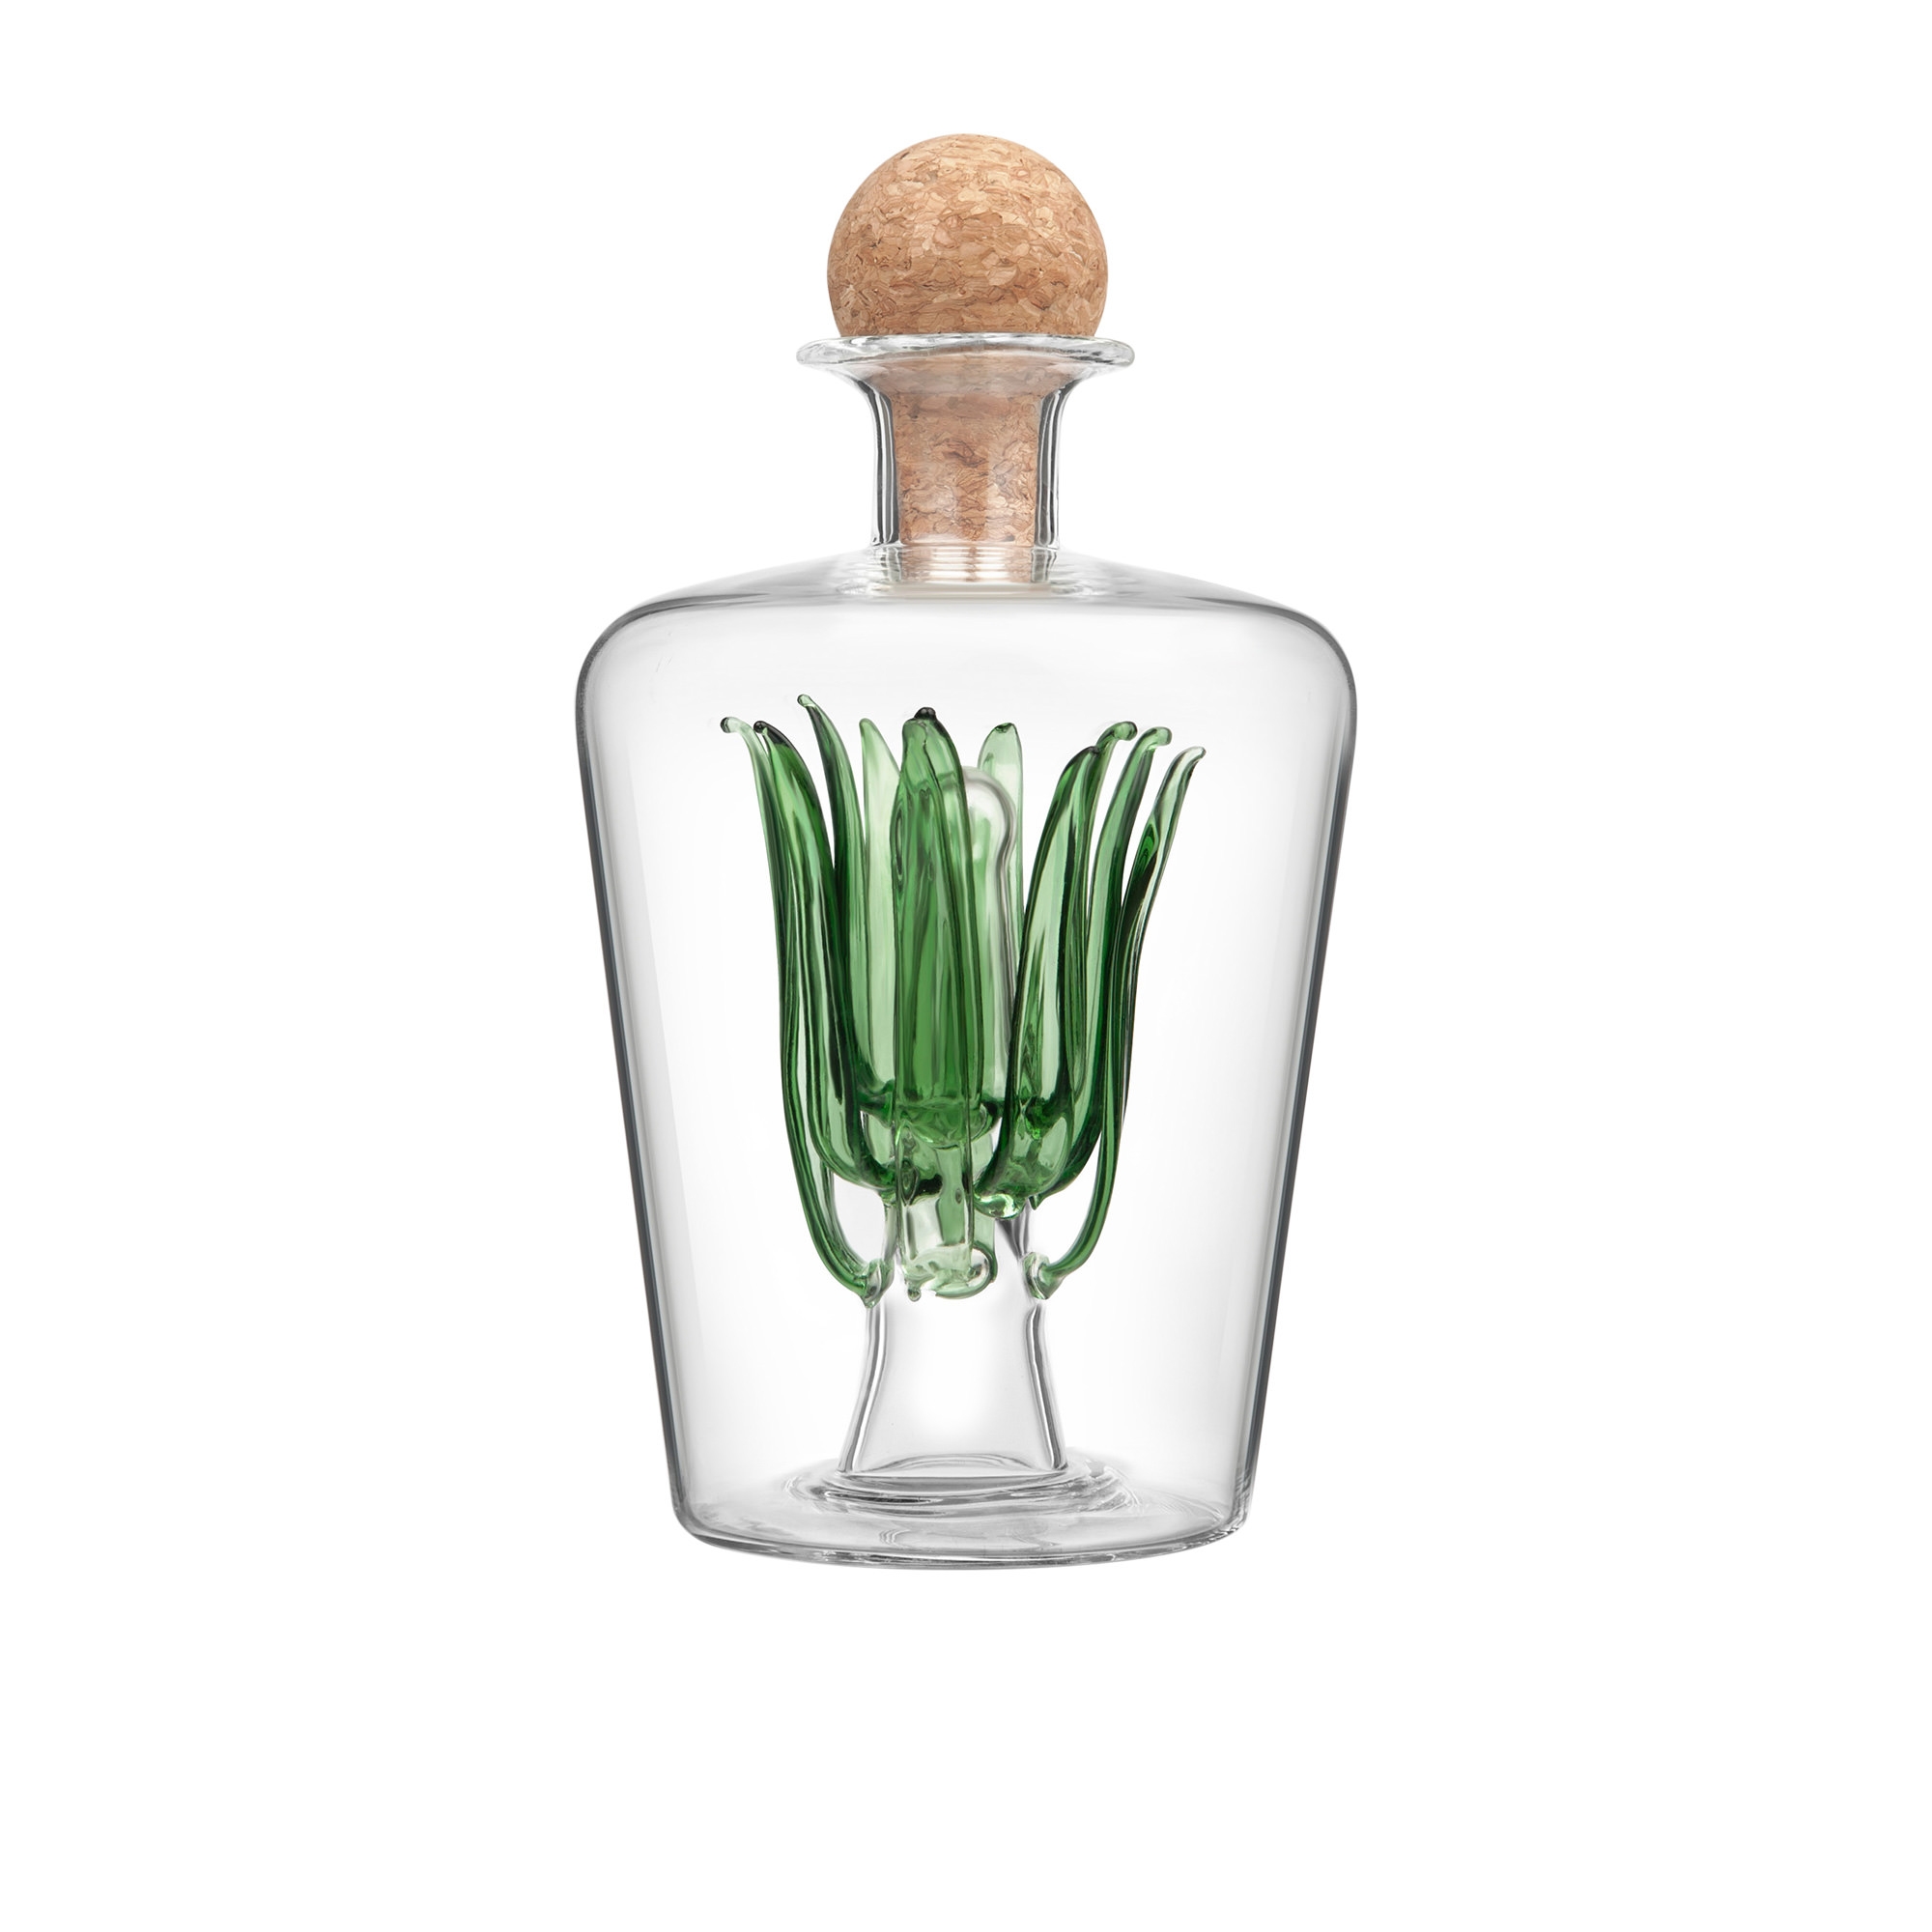 Final Touch Tequila Decanter 850ml Image 1